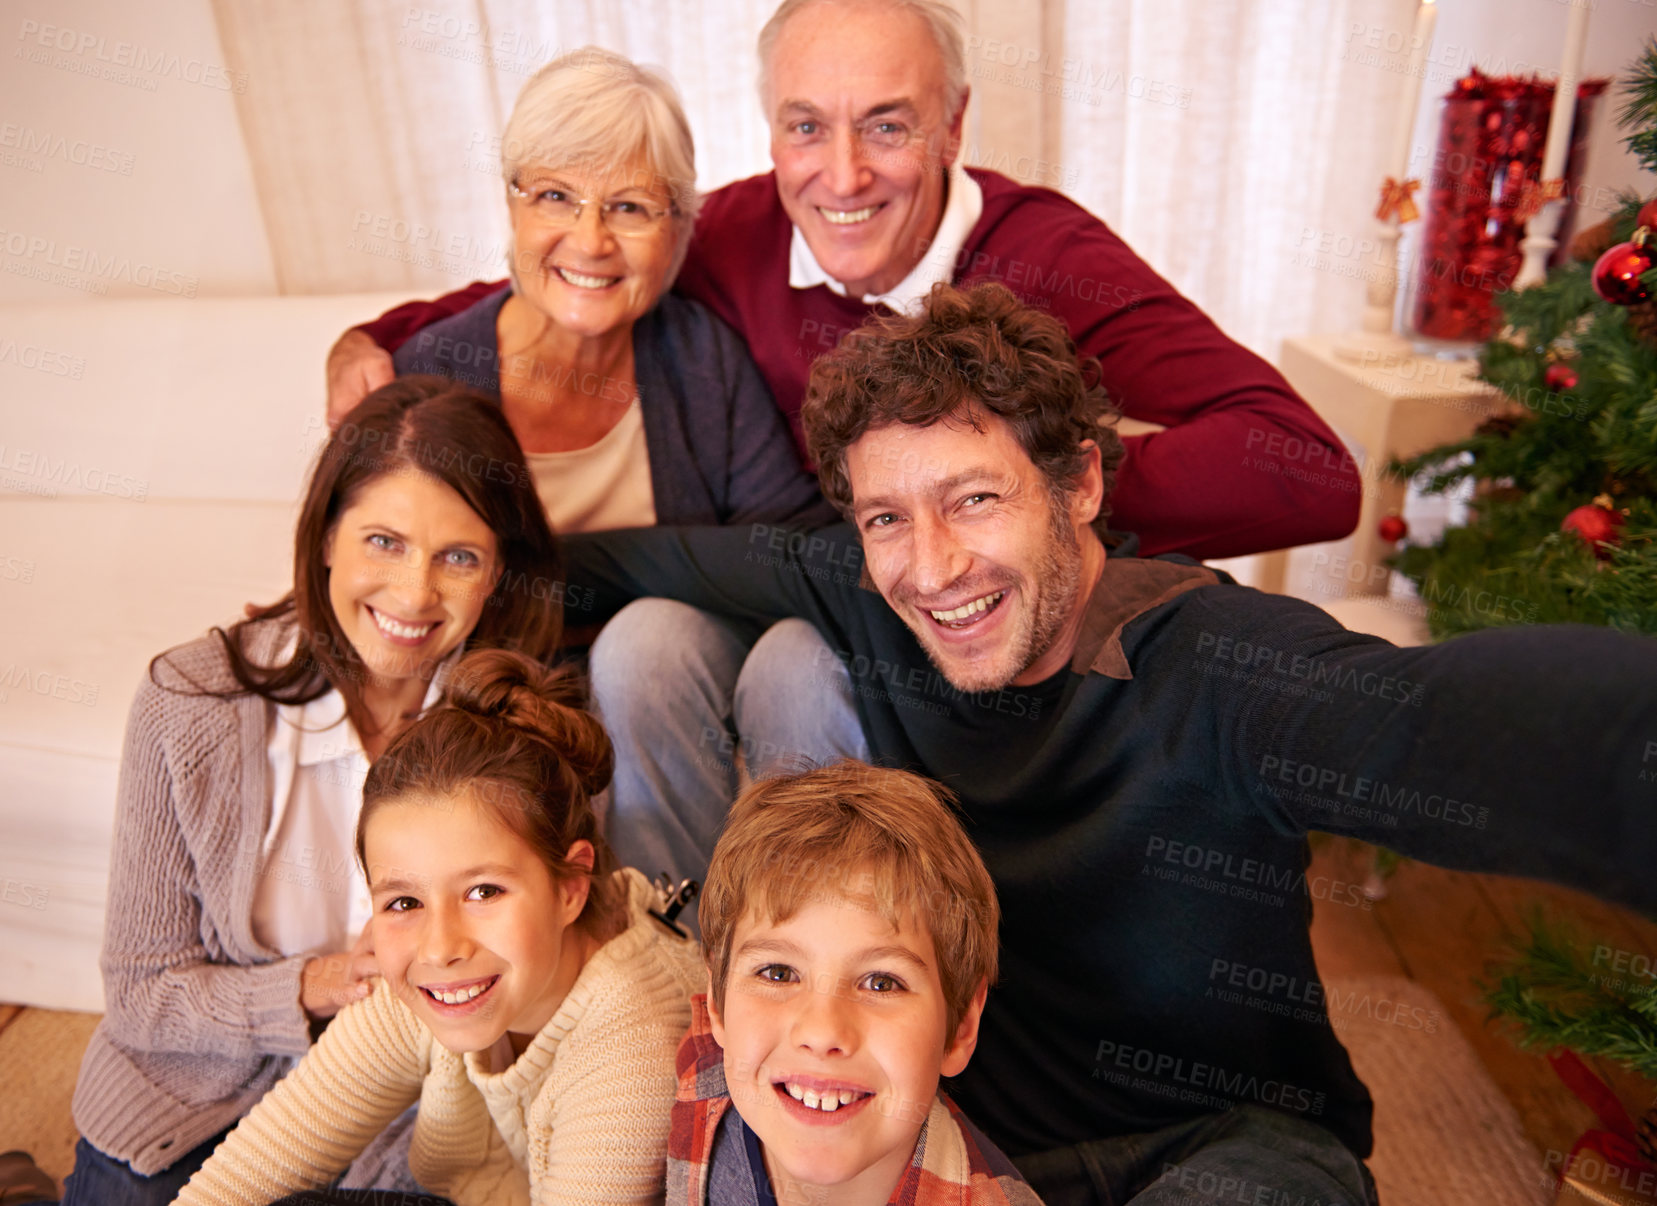 Buy stock photo Big family, portrait smile and Christmas selfie relaxing for quality bonding together at home. Mother, father and grandparents with kids smiling for festive holiday, celebration or family photo time